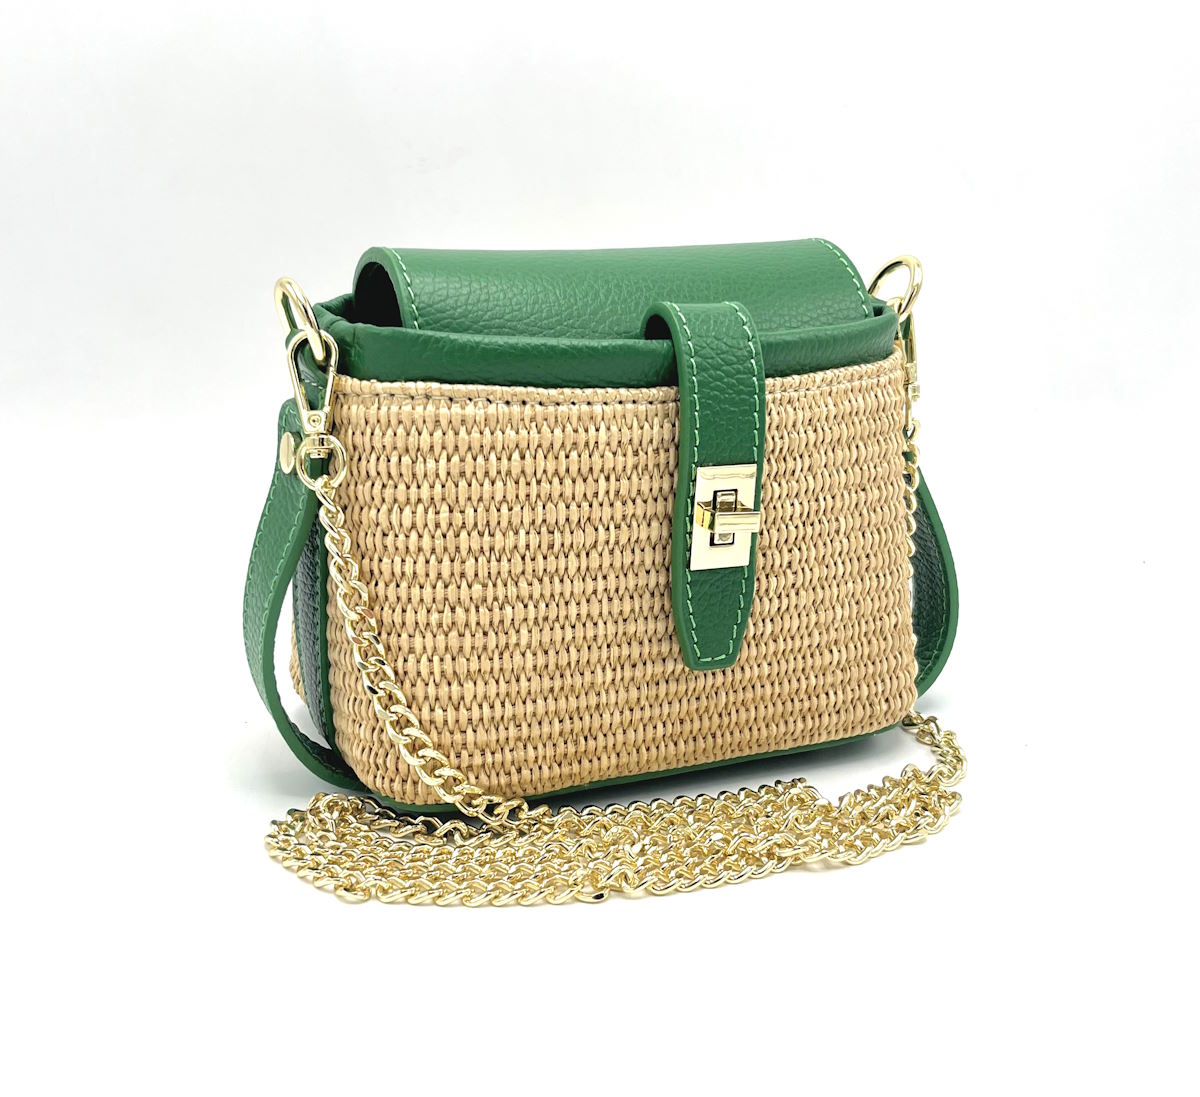 Mini leather and straw bag, Made in Italy, art. 112475